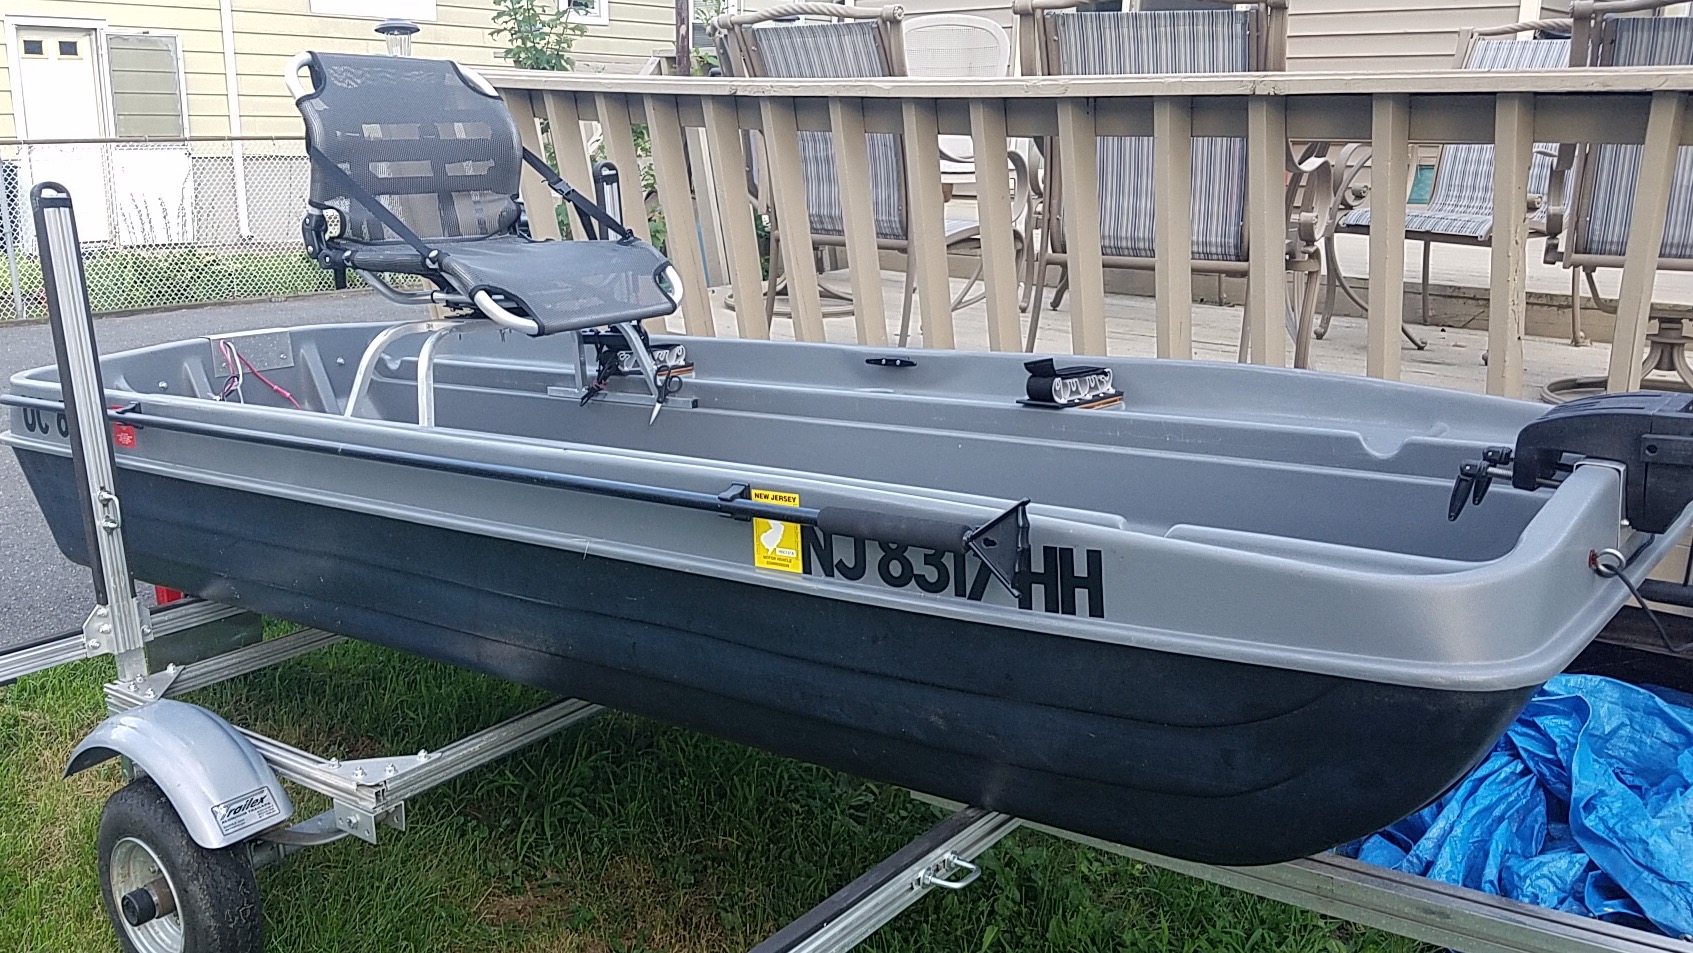 Any Pelican Bass Raider Owners Out There? - Page 108 - Bass Boats, Canoes,  Kayaks and more - Bass Fishing Forums